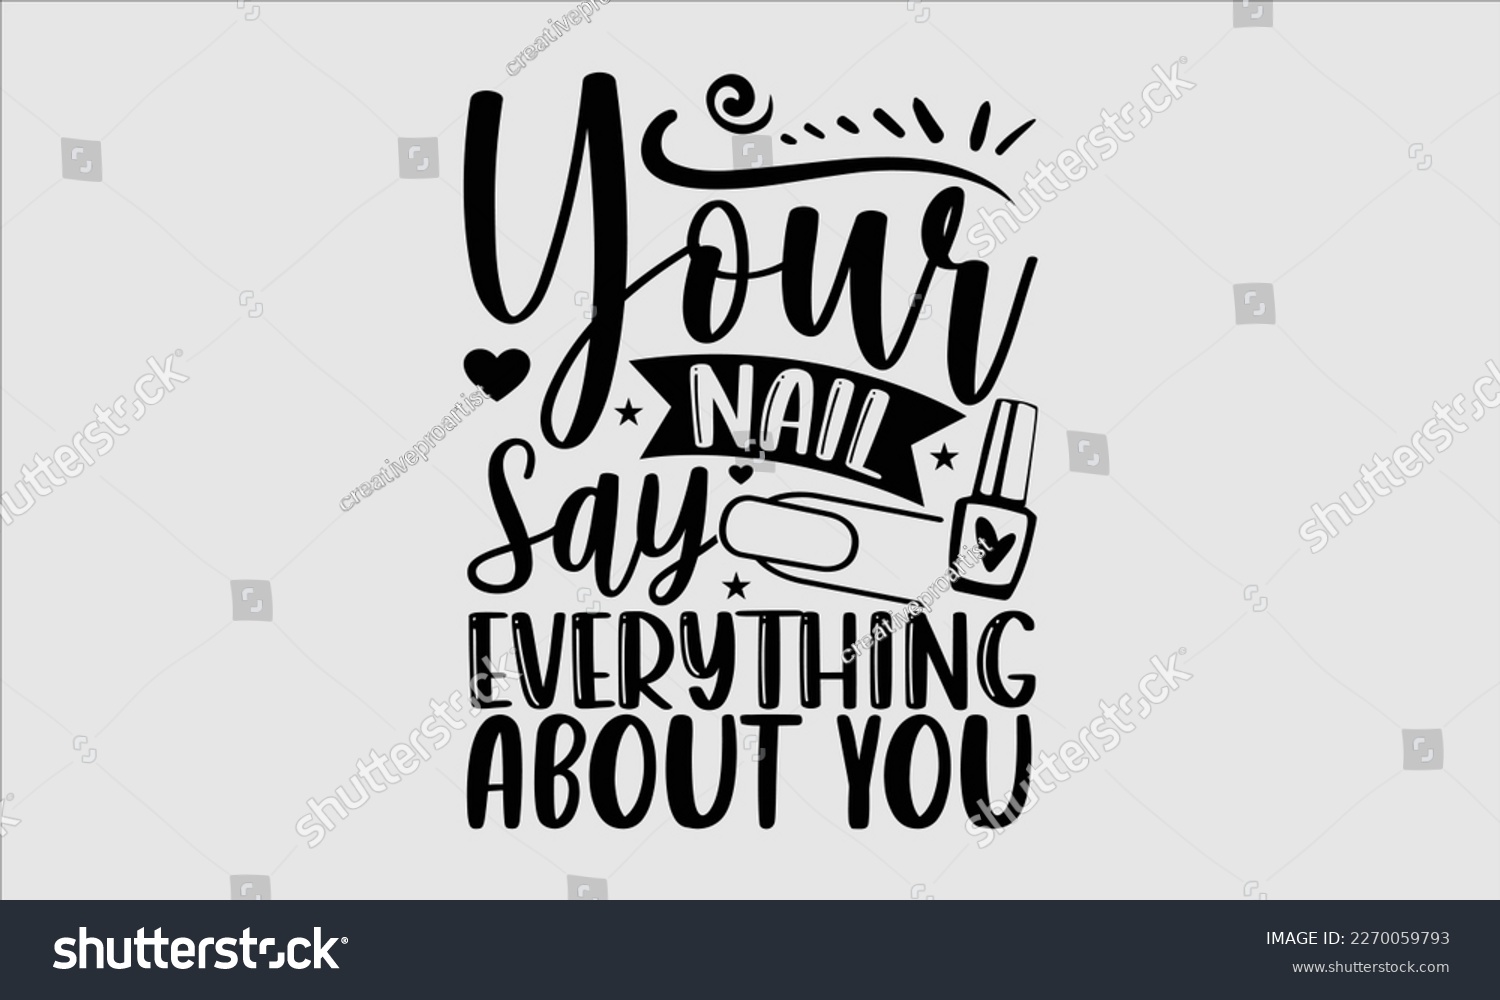 SVG of Your nail say everything about you- Nail Tech t shirts design, Hand written lettering phrase, Isolated on white background,  Calligraphy graphic for Cutting Machine, svg eps 10. svg